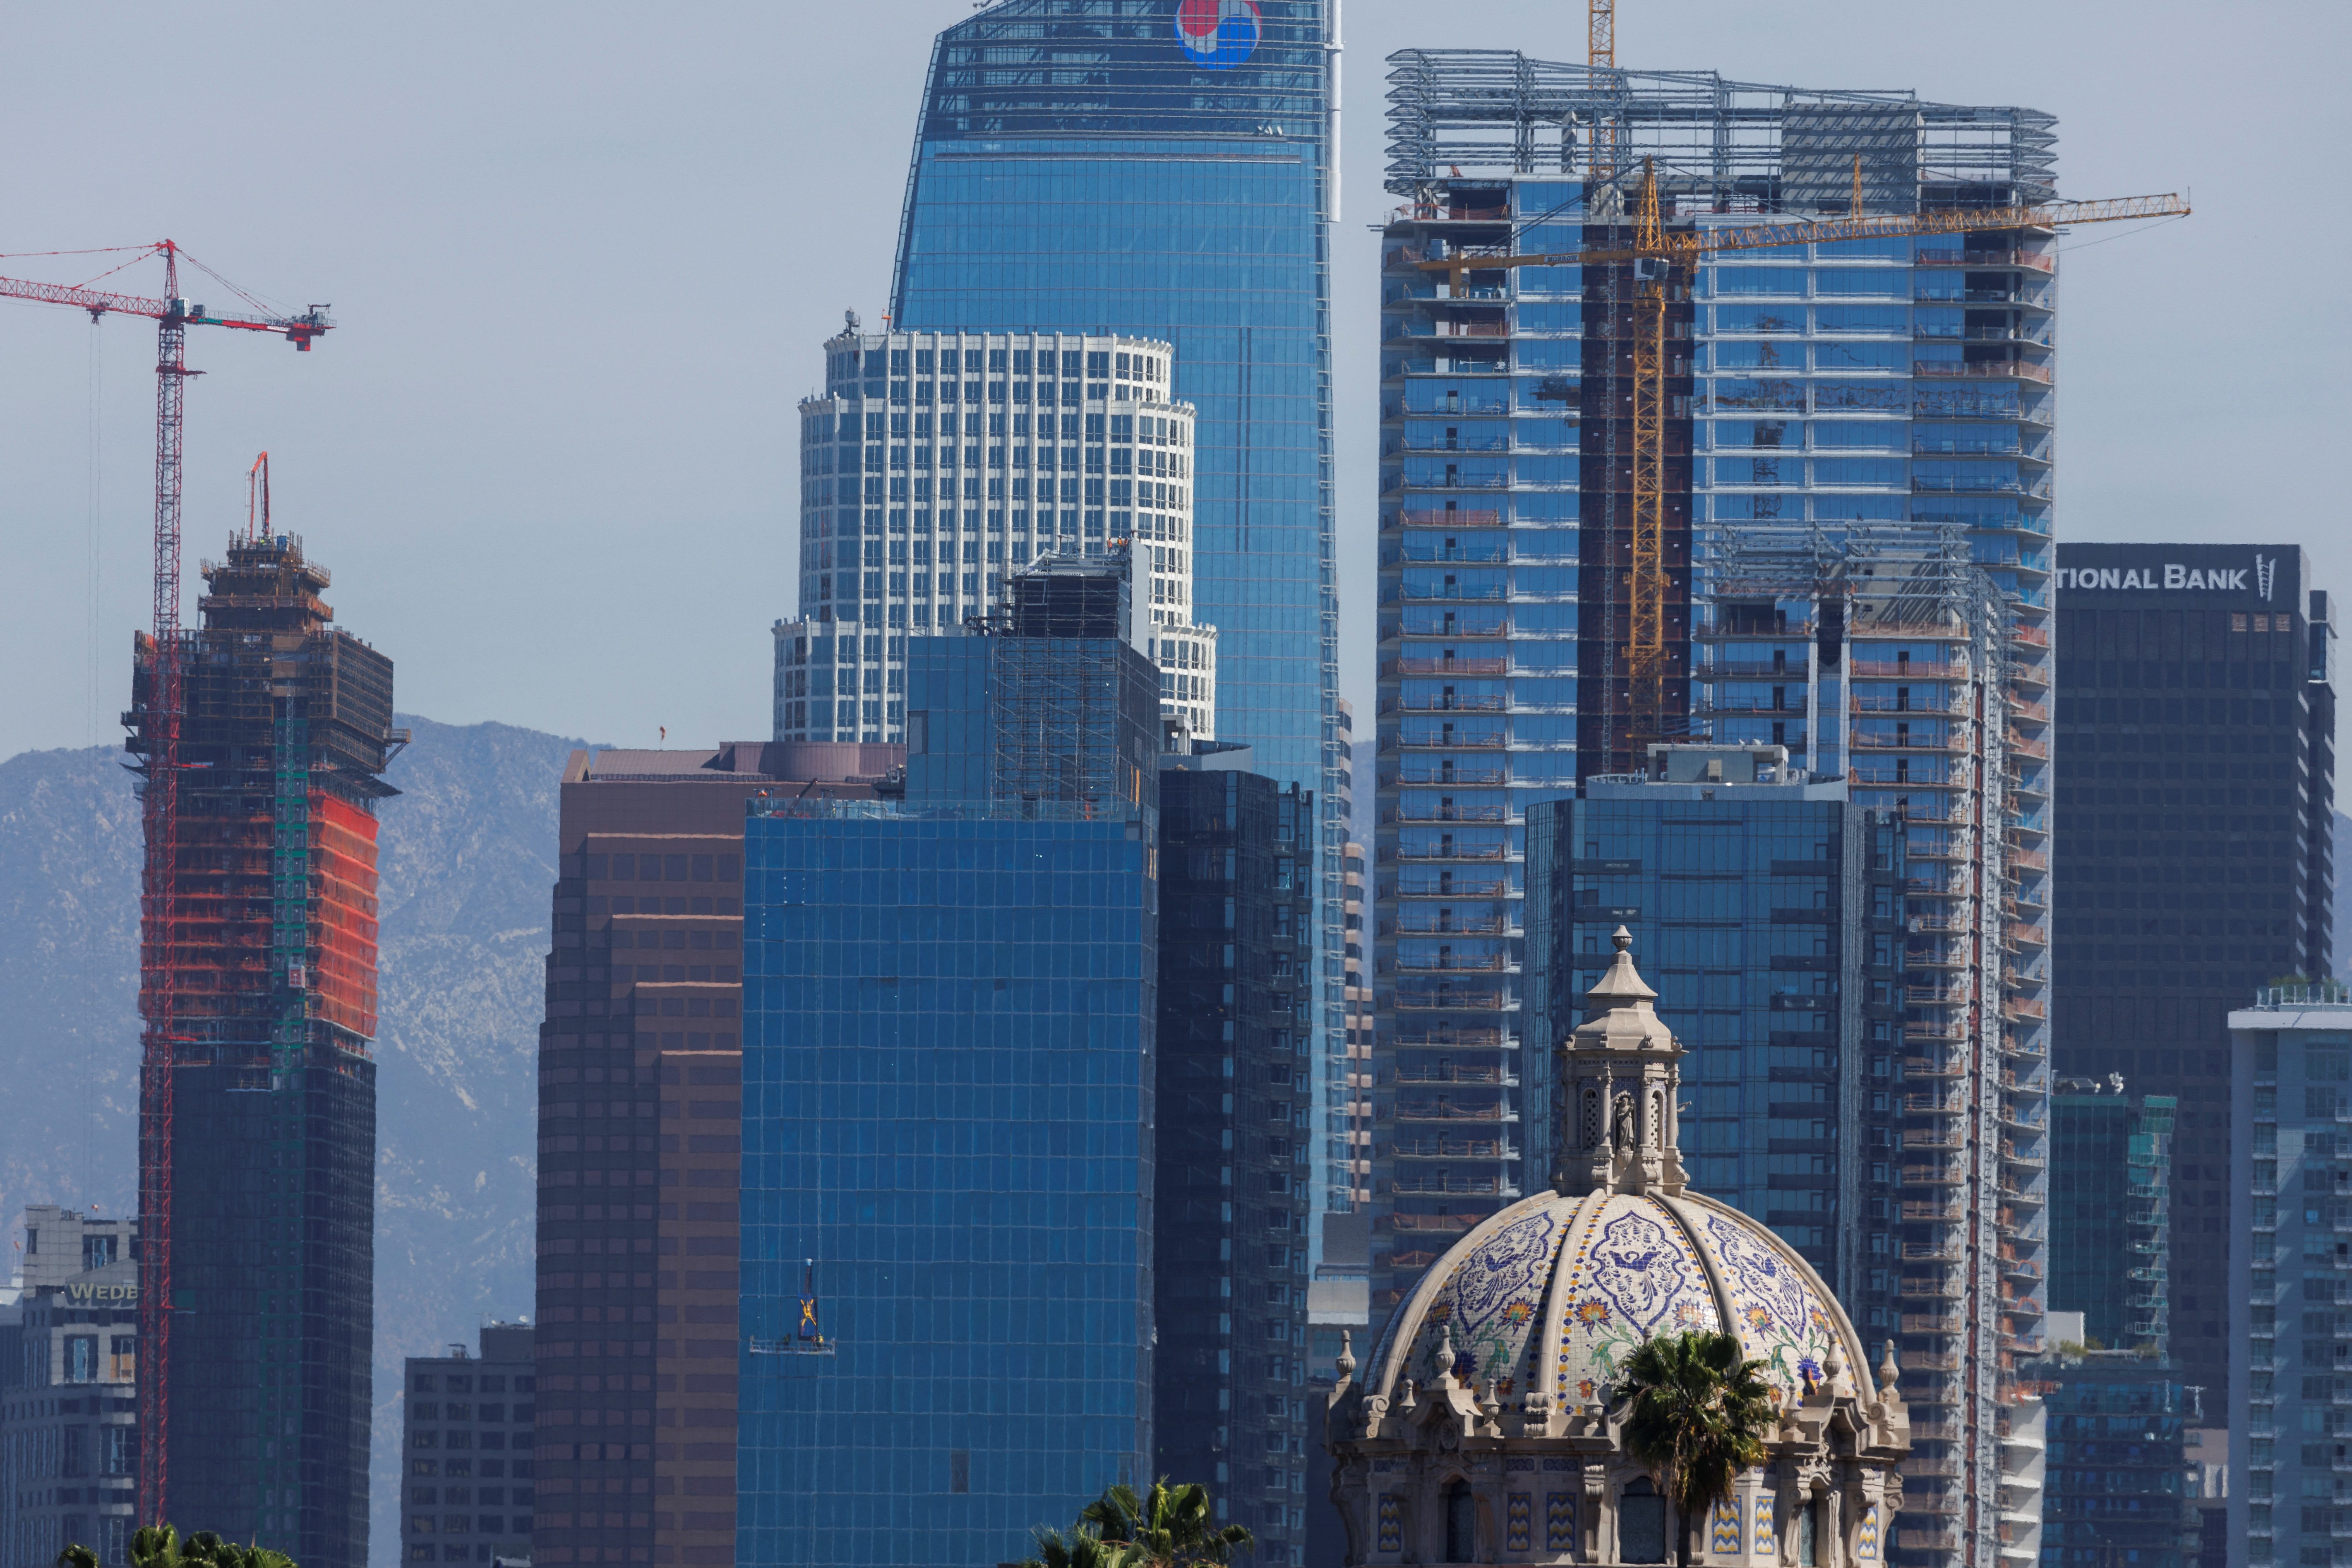 A view of the skyline of downtown Los Angeles